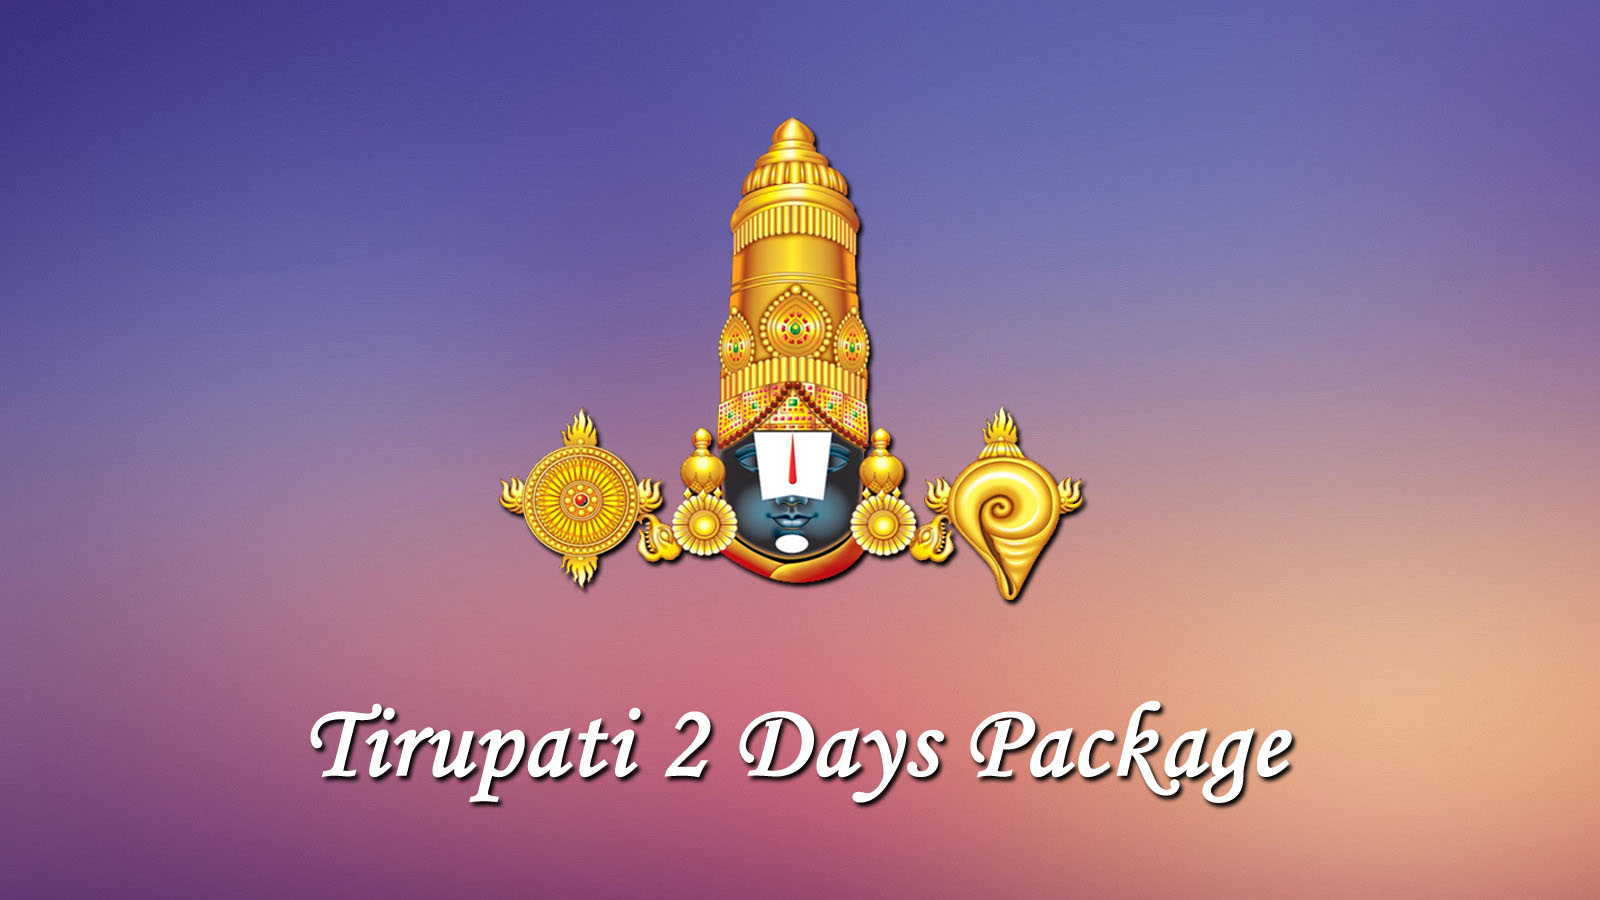 One Day Tirupati Tour Packages From Chennai Tirupati Special Entry Darshan